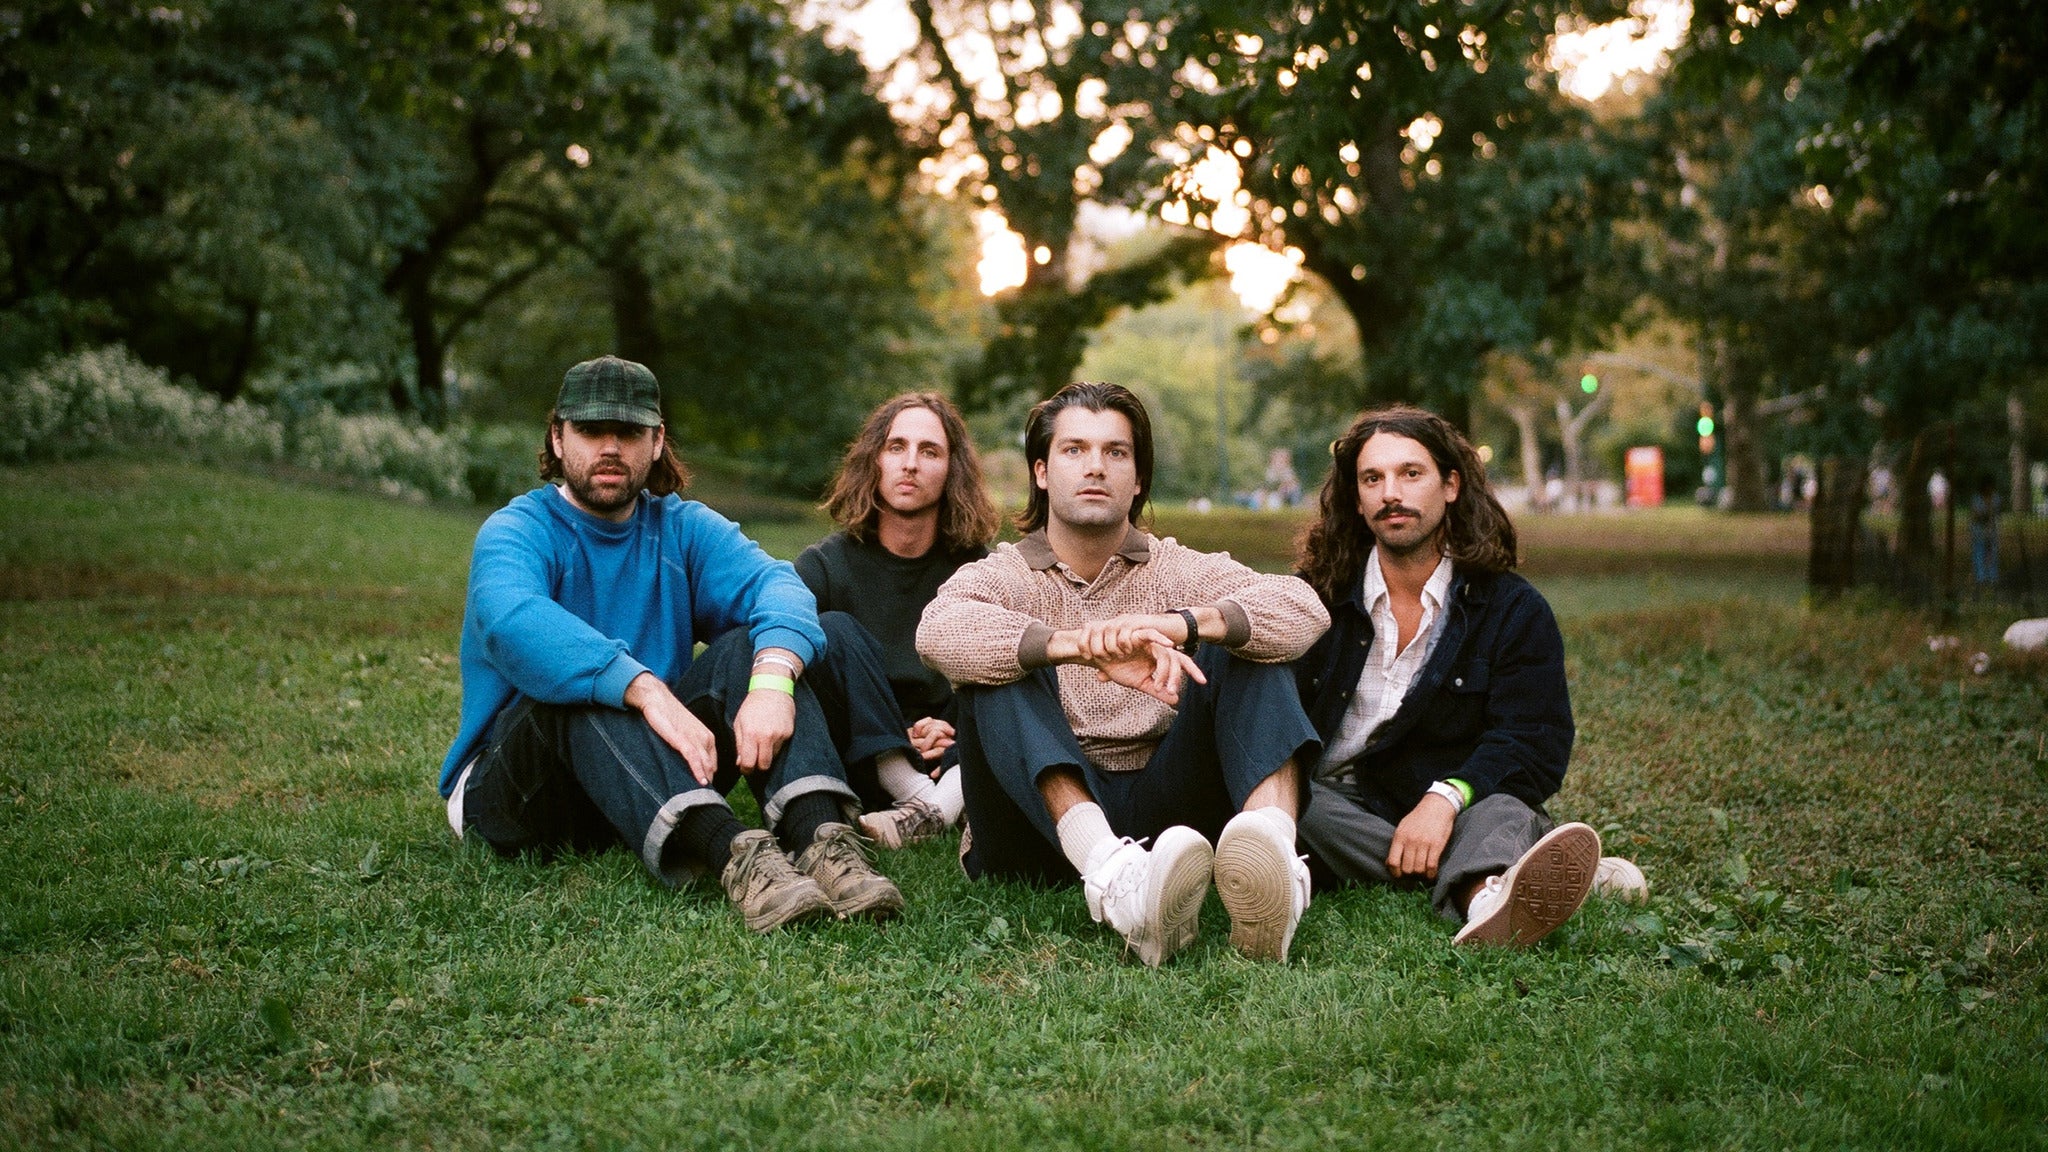 SORRY, THIS EVENT IS NO LONGER ACTIVE<br>Turnover at Aggie Theater - Fort Collins, CO 80524